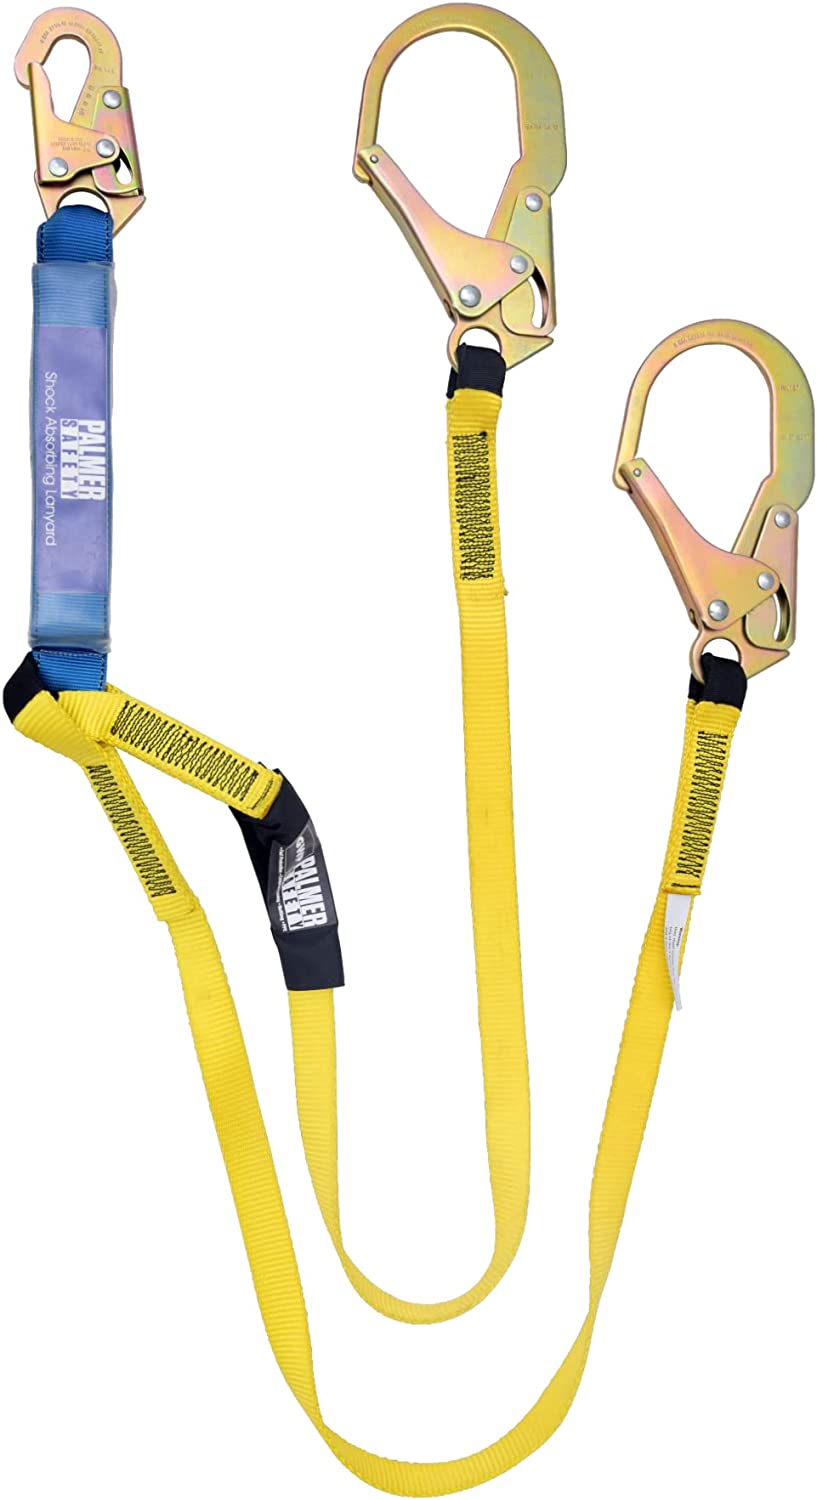 Palmer Safety L112211 Lanyard 6 FT. with Internal Shock Absorber